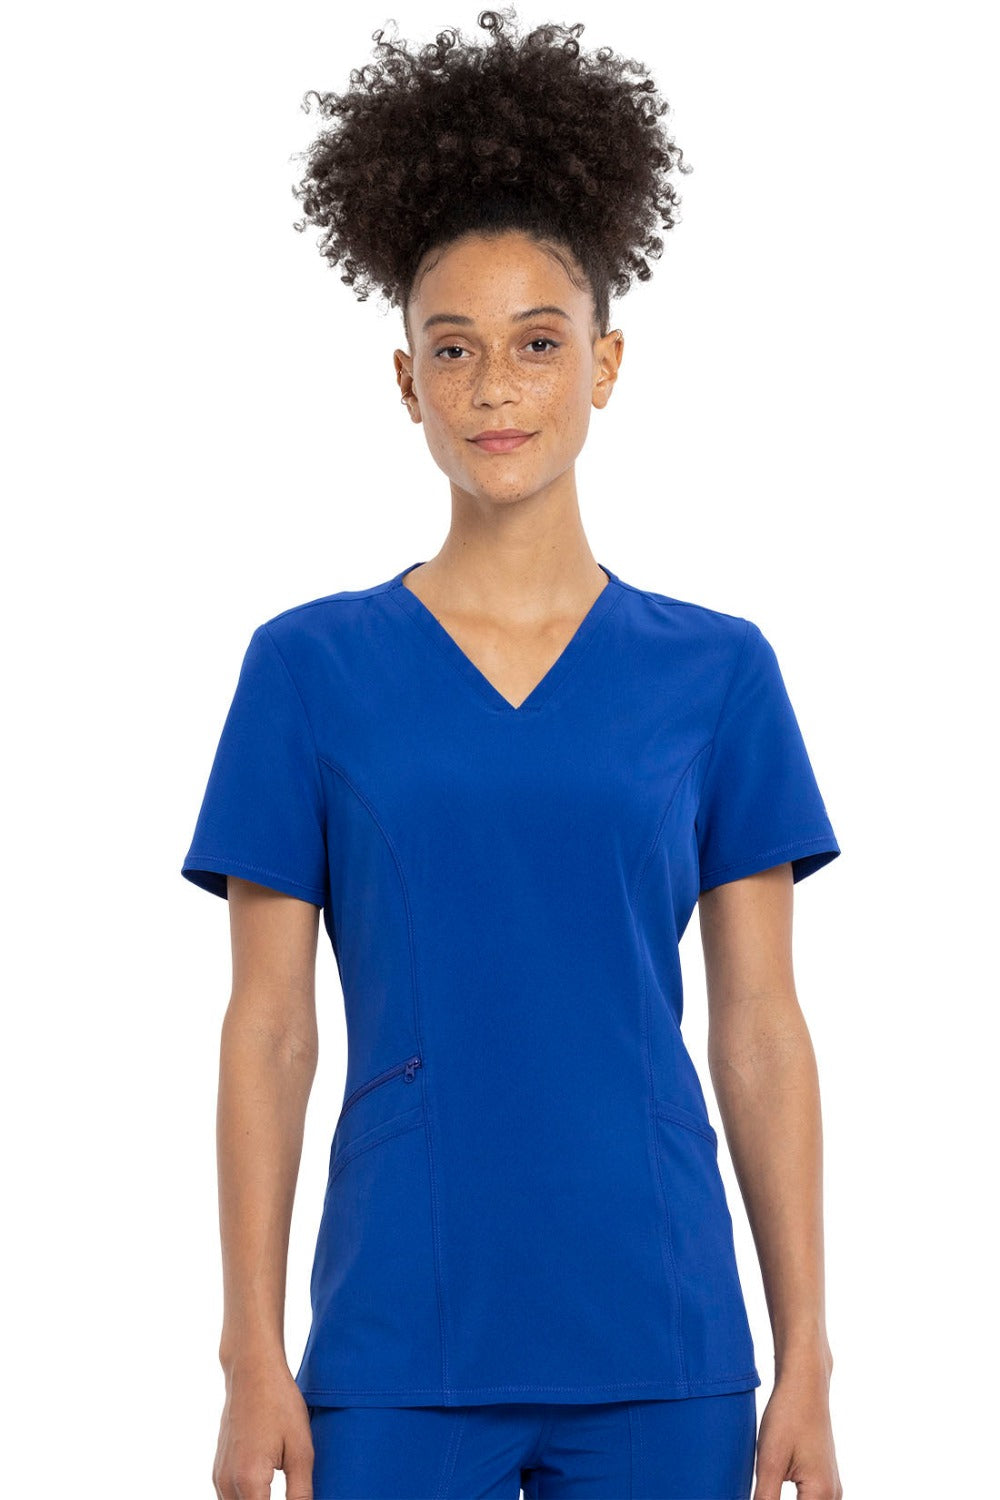 Cherokee Allura V-Neck Scrub Top in Galaxy Blue at Parker's Clothing and Shoes.